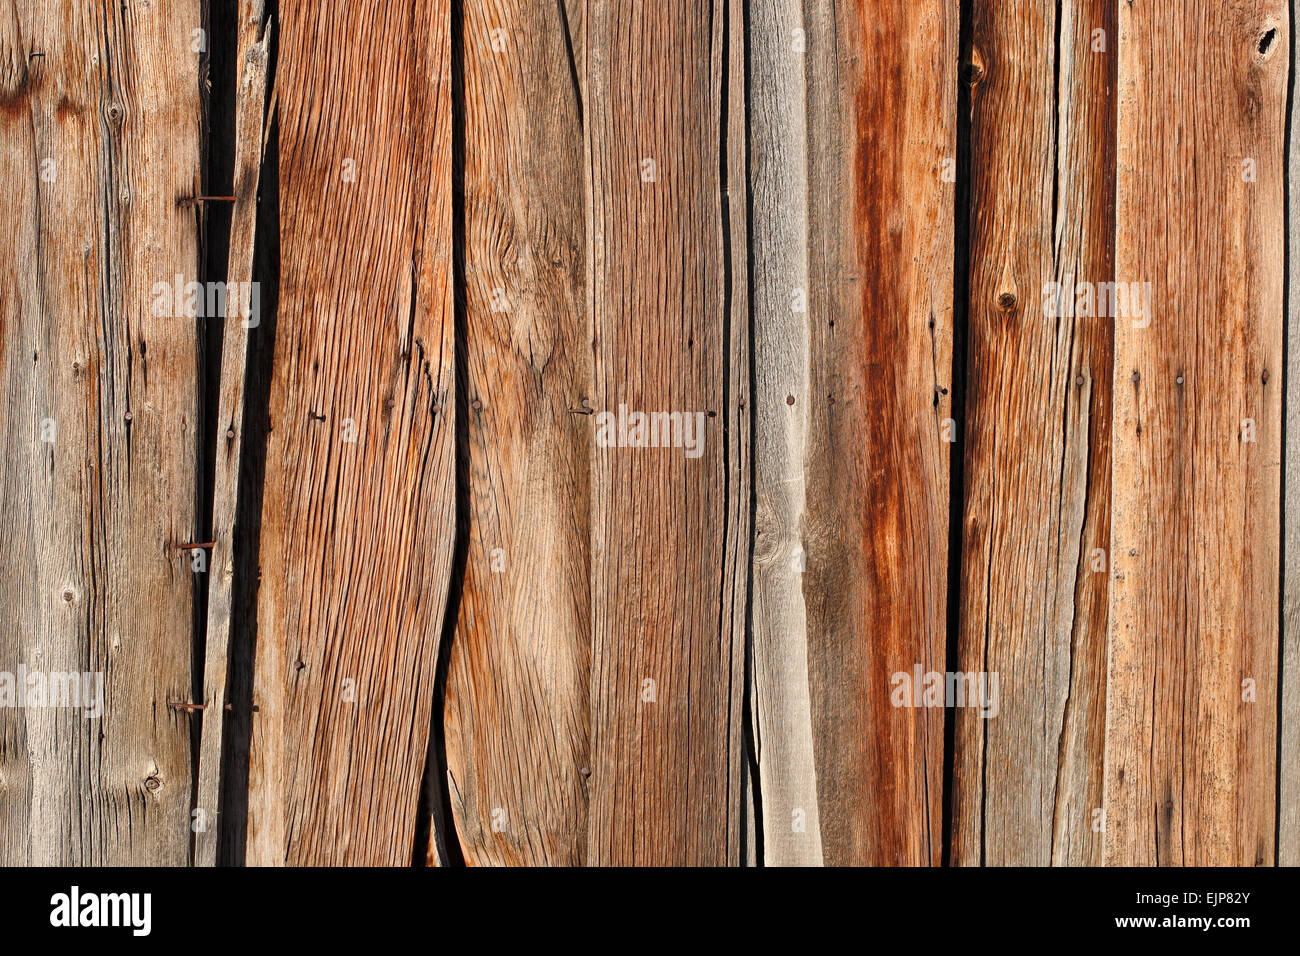 rustic wood background Stock Photo